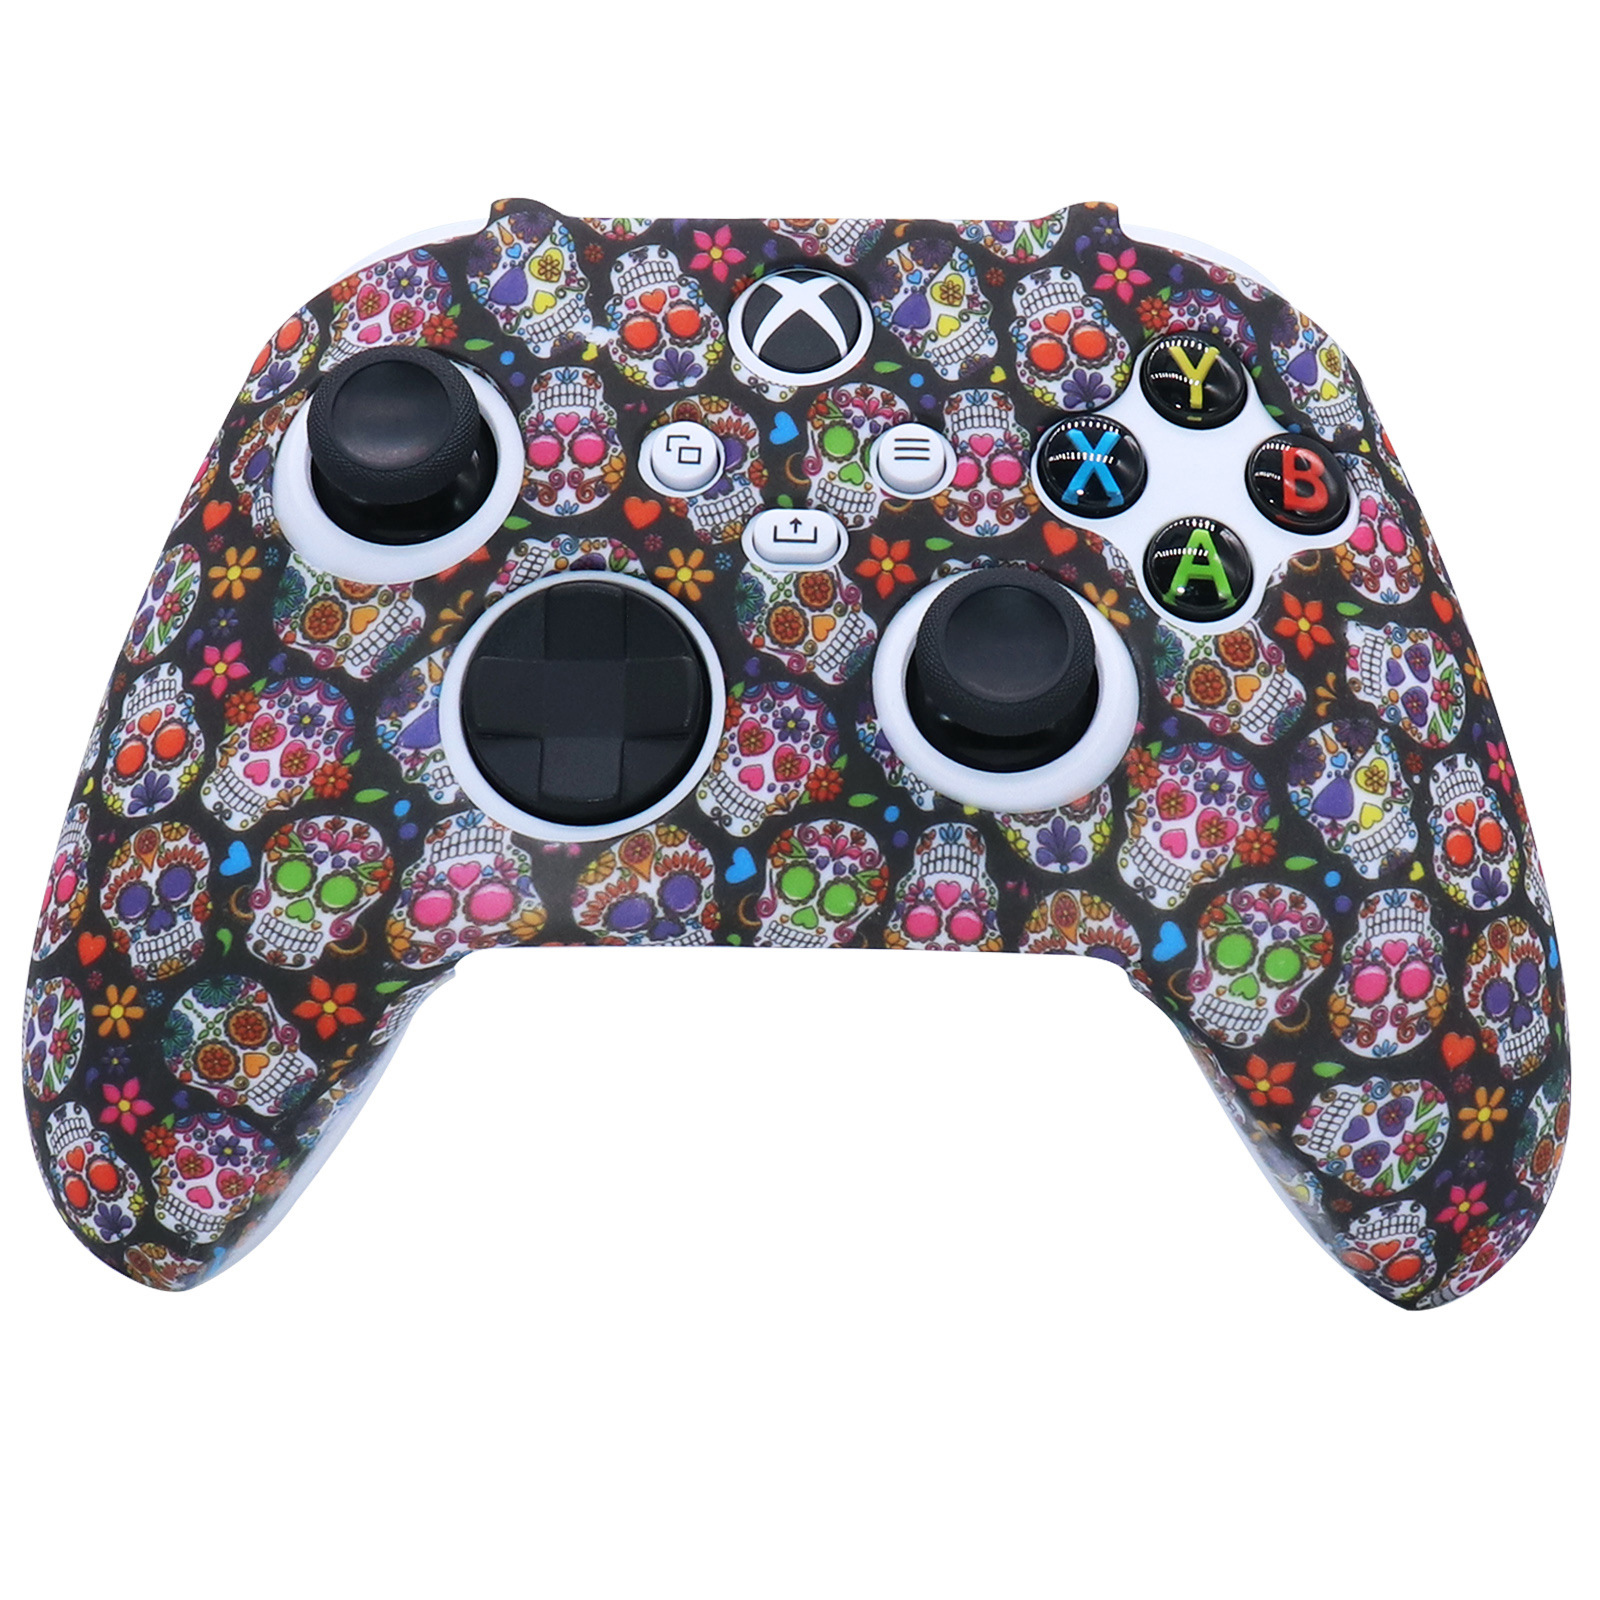 RALAN-Anti-slip-Soft-Silicone-Protective-Case-Cover-Skins-for-Microsoft-Xbox-Series-S-X-Game-Control-1922447-13